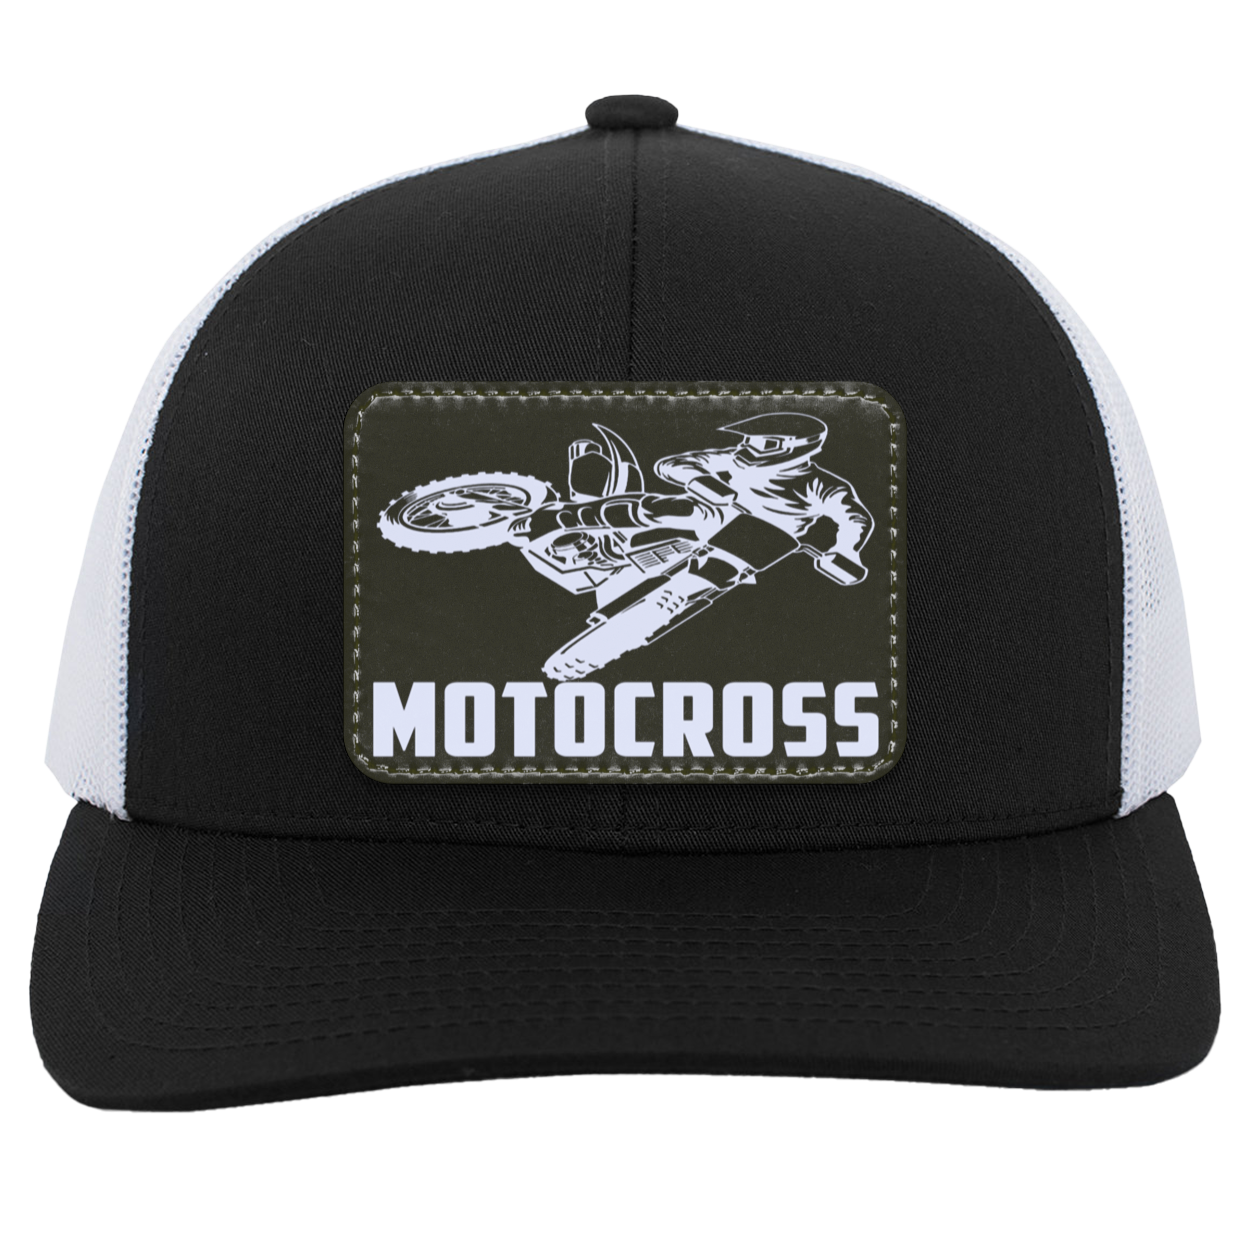 Motocross Trucker Patched Snap Back